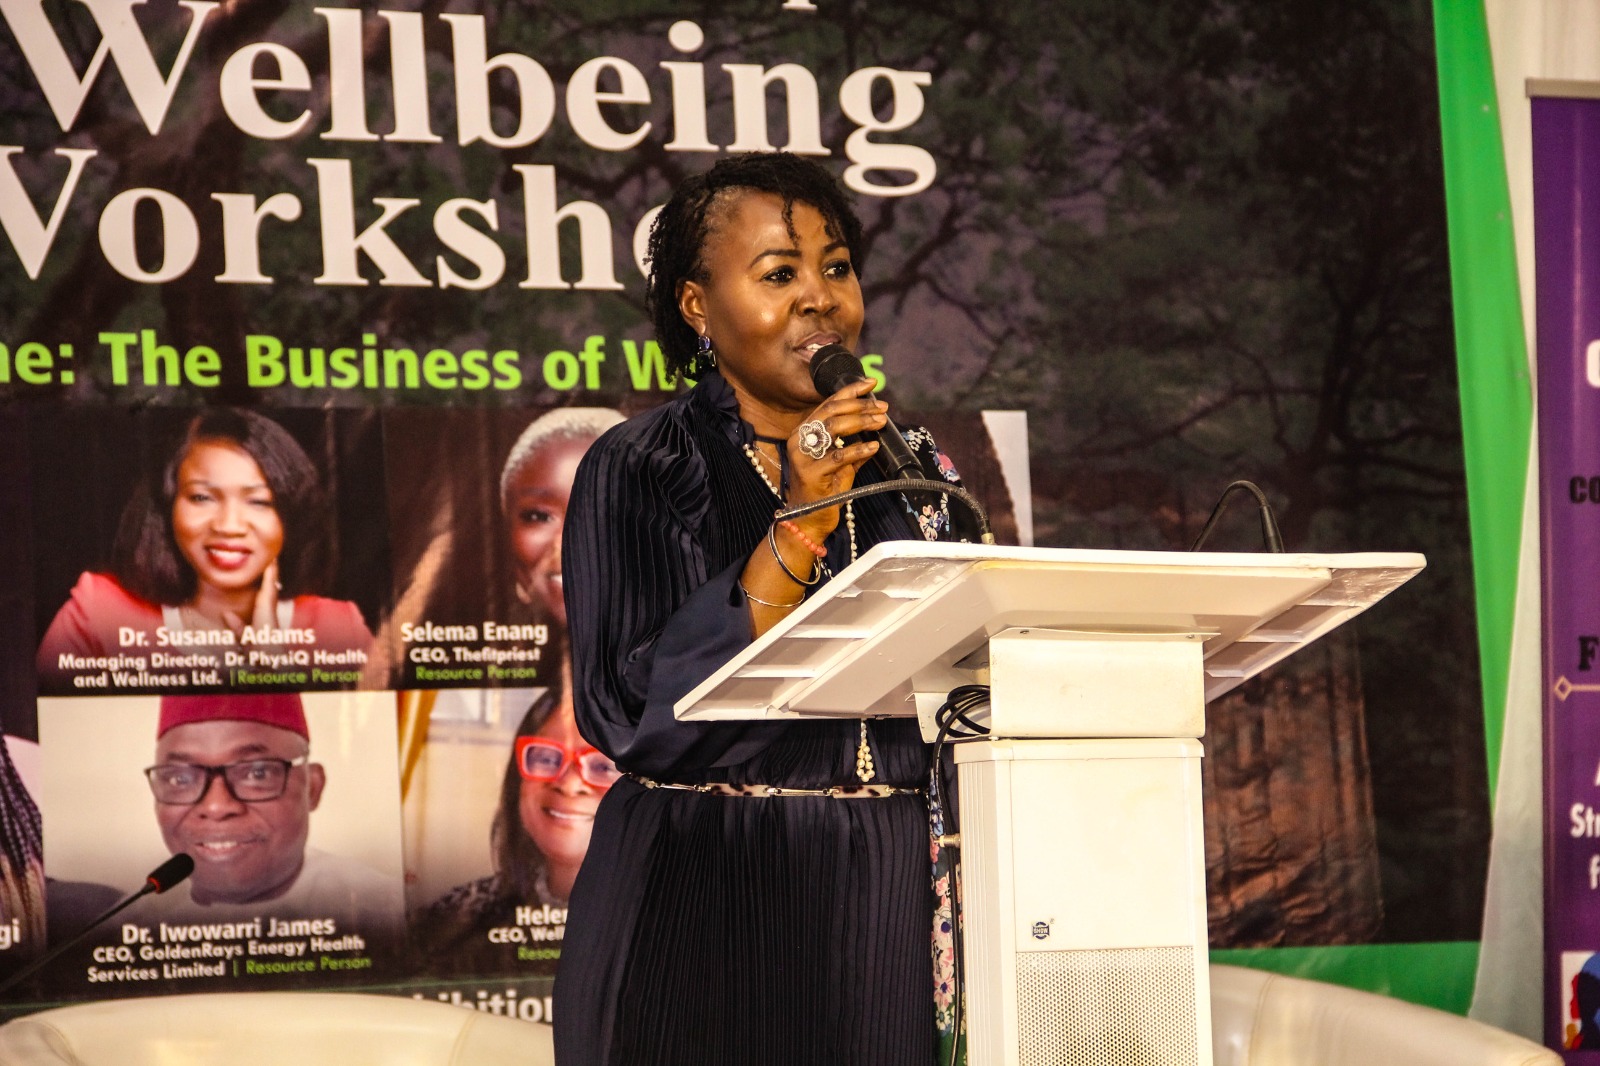 Promoting Health and Wellbeing: Reflections on My Recent Speech